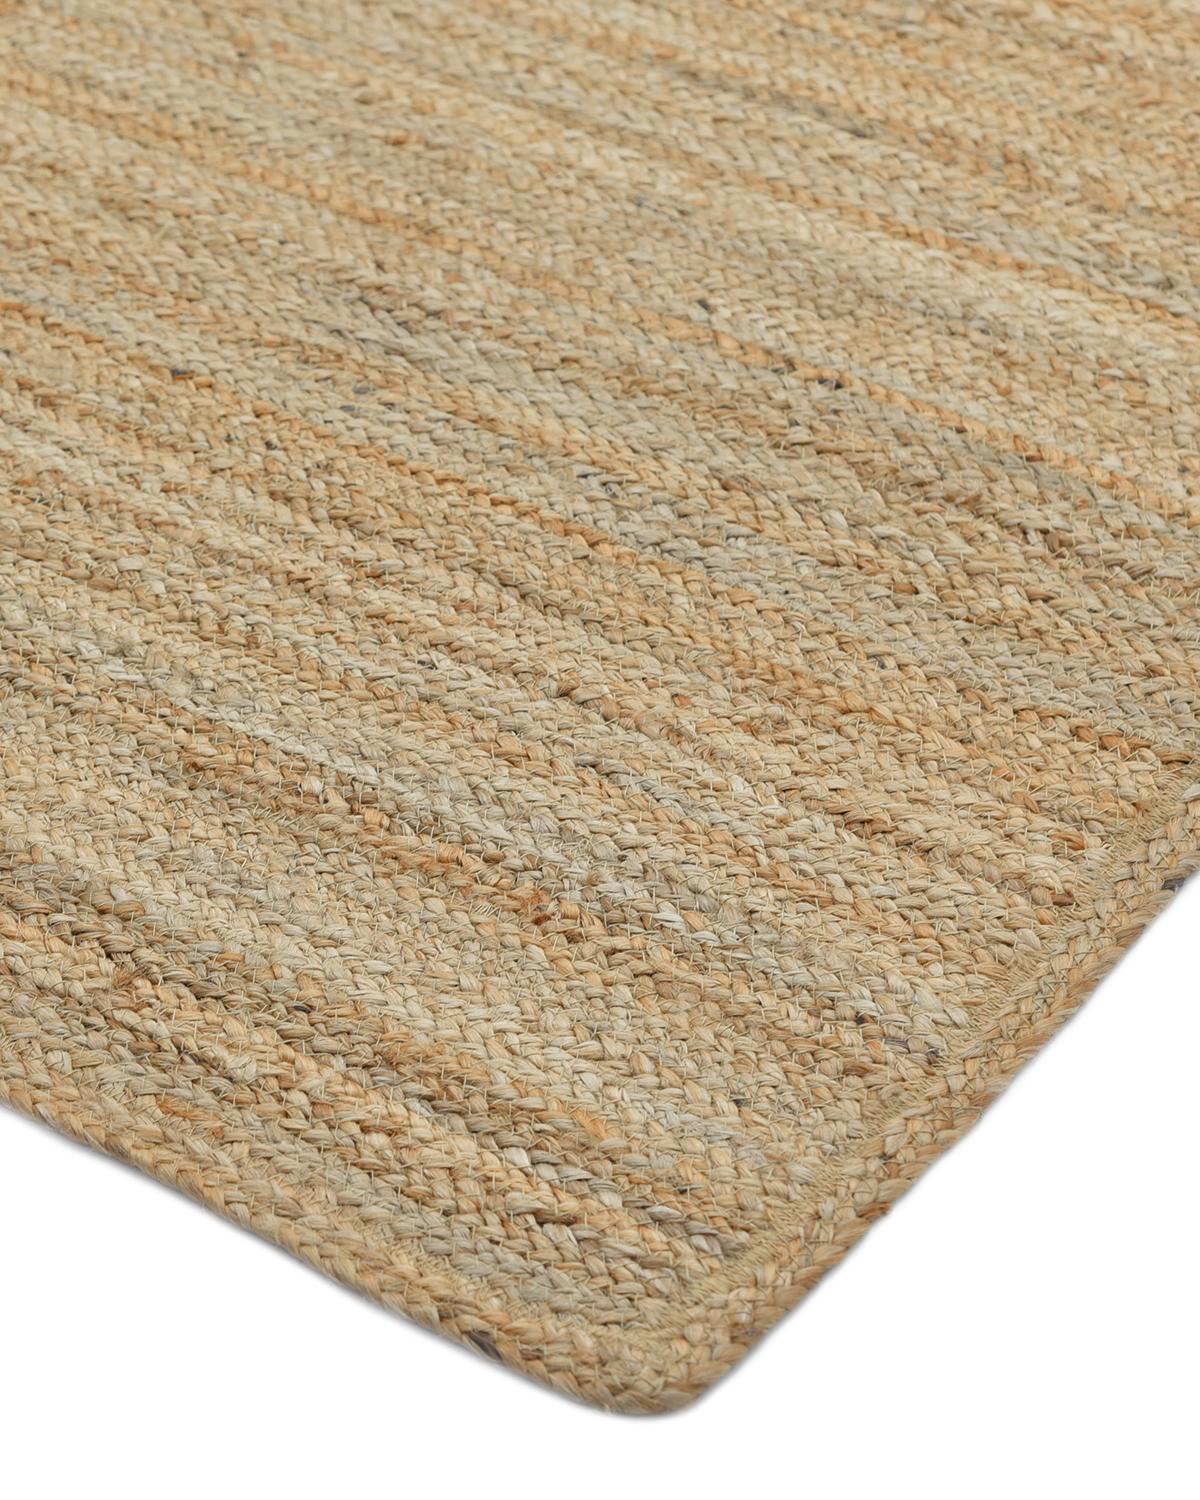 Bridging the gap between traditional and modern, the Transitional Jute collection features rugs that exemplify versatility. Soft underfoot with a pleasing combination of textures, these vintage-inspired rugs add traditional beauty to any room.